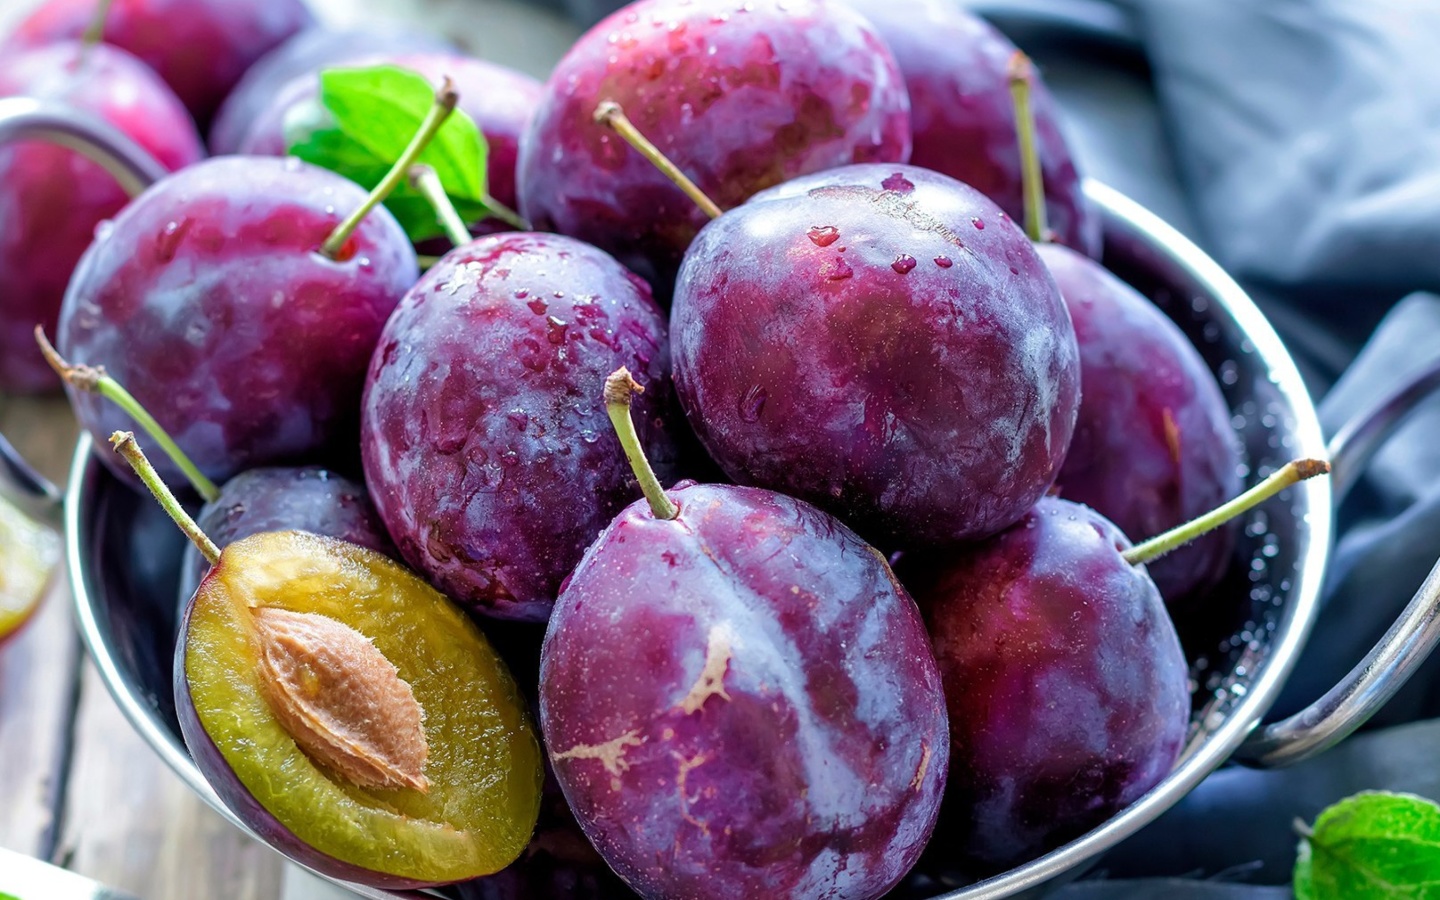 Plums with Vitamins wallpaper 1440x900